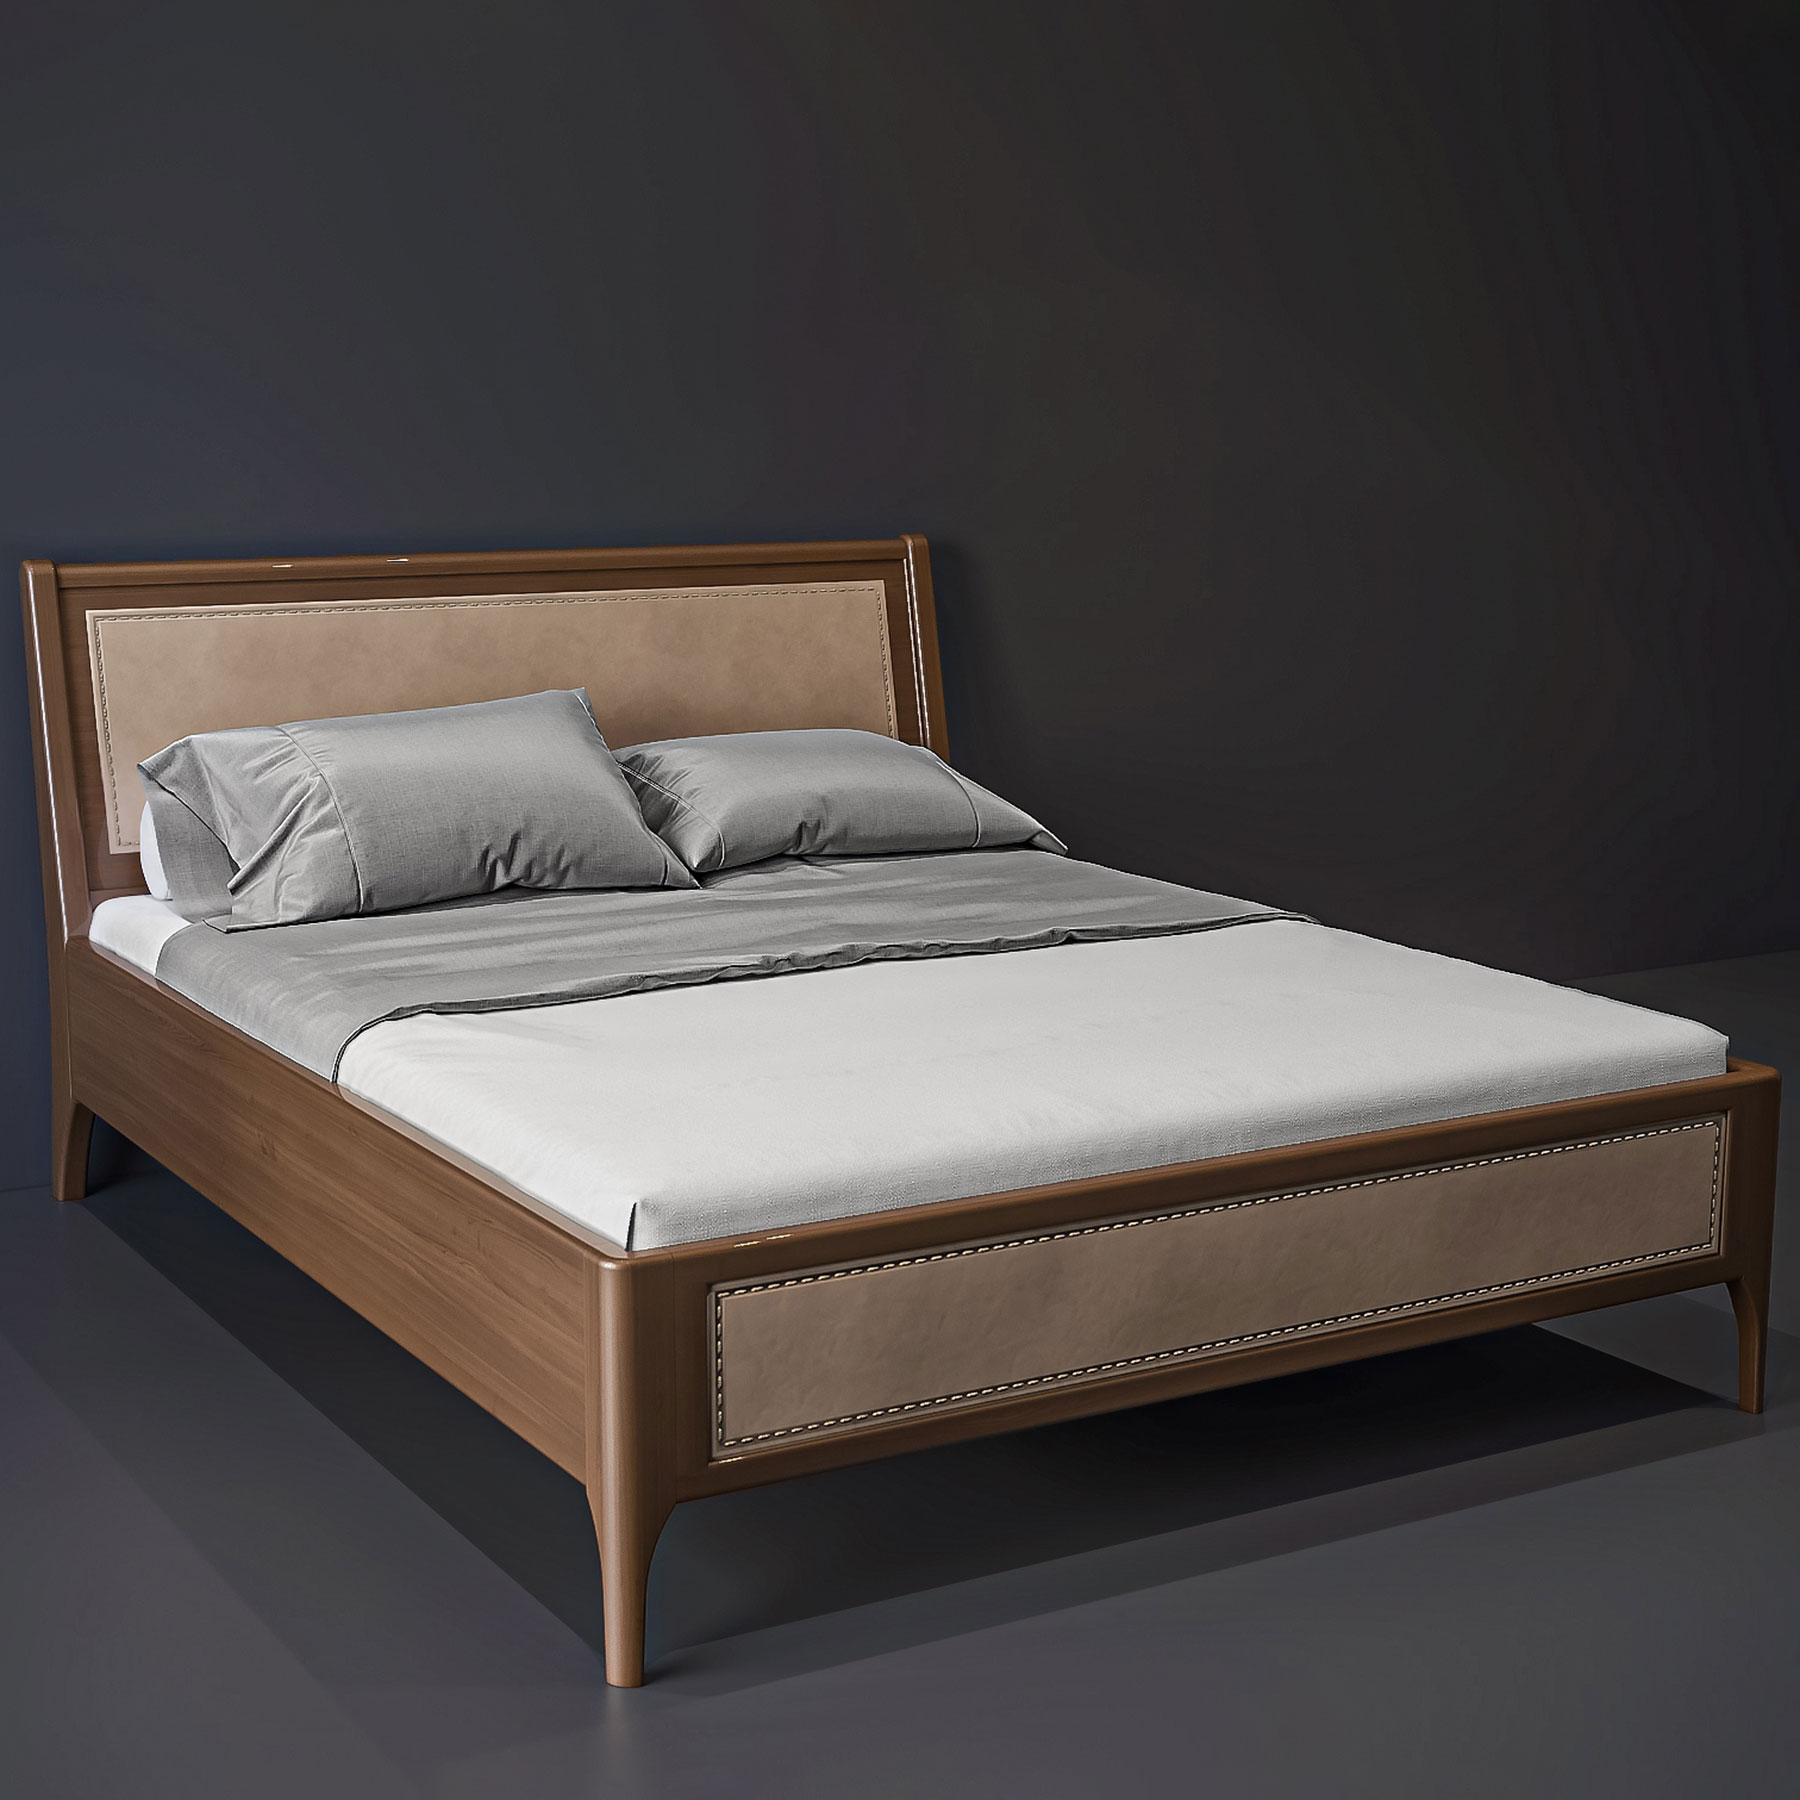 Double bed from Audrey collection